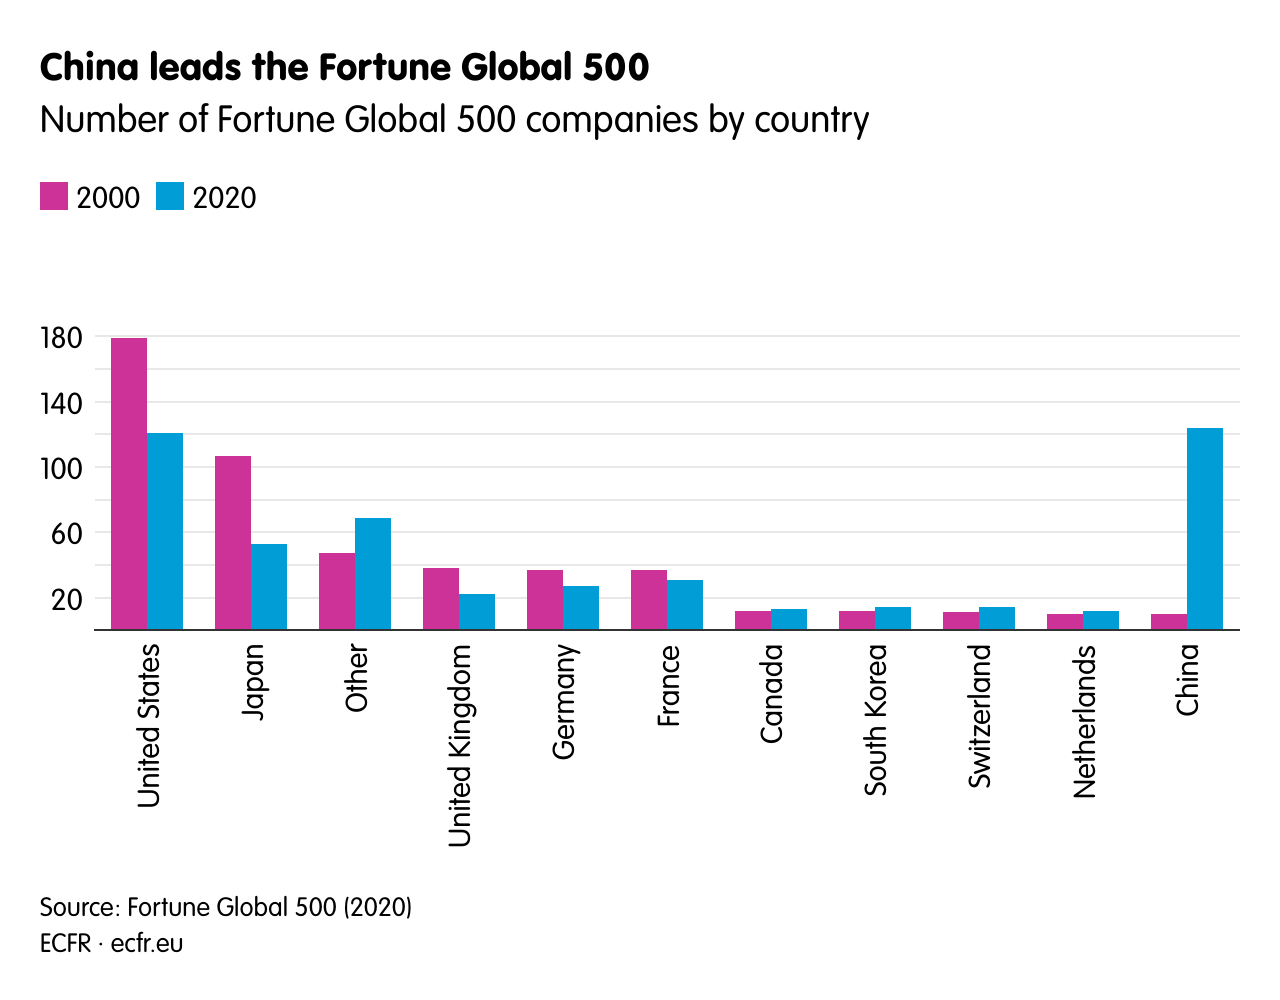 China leads the Fortune Global 500